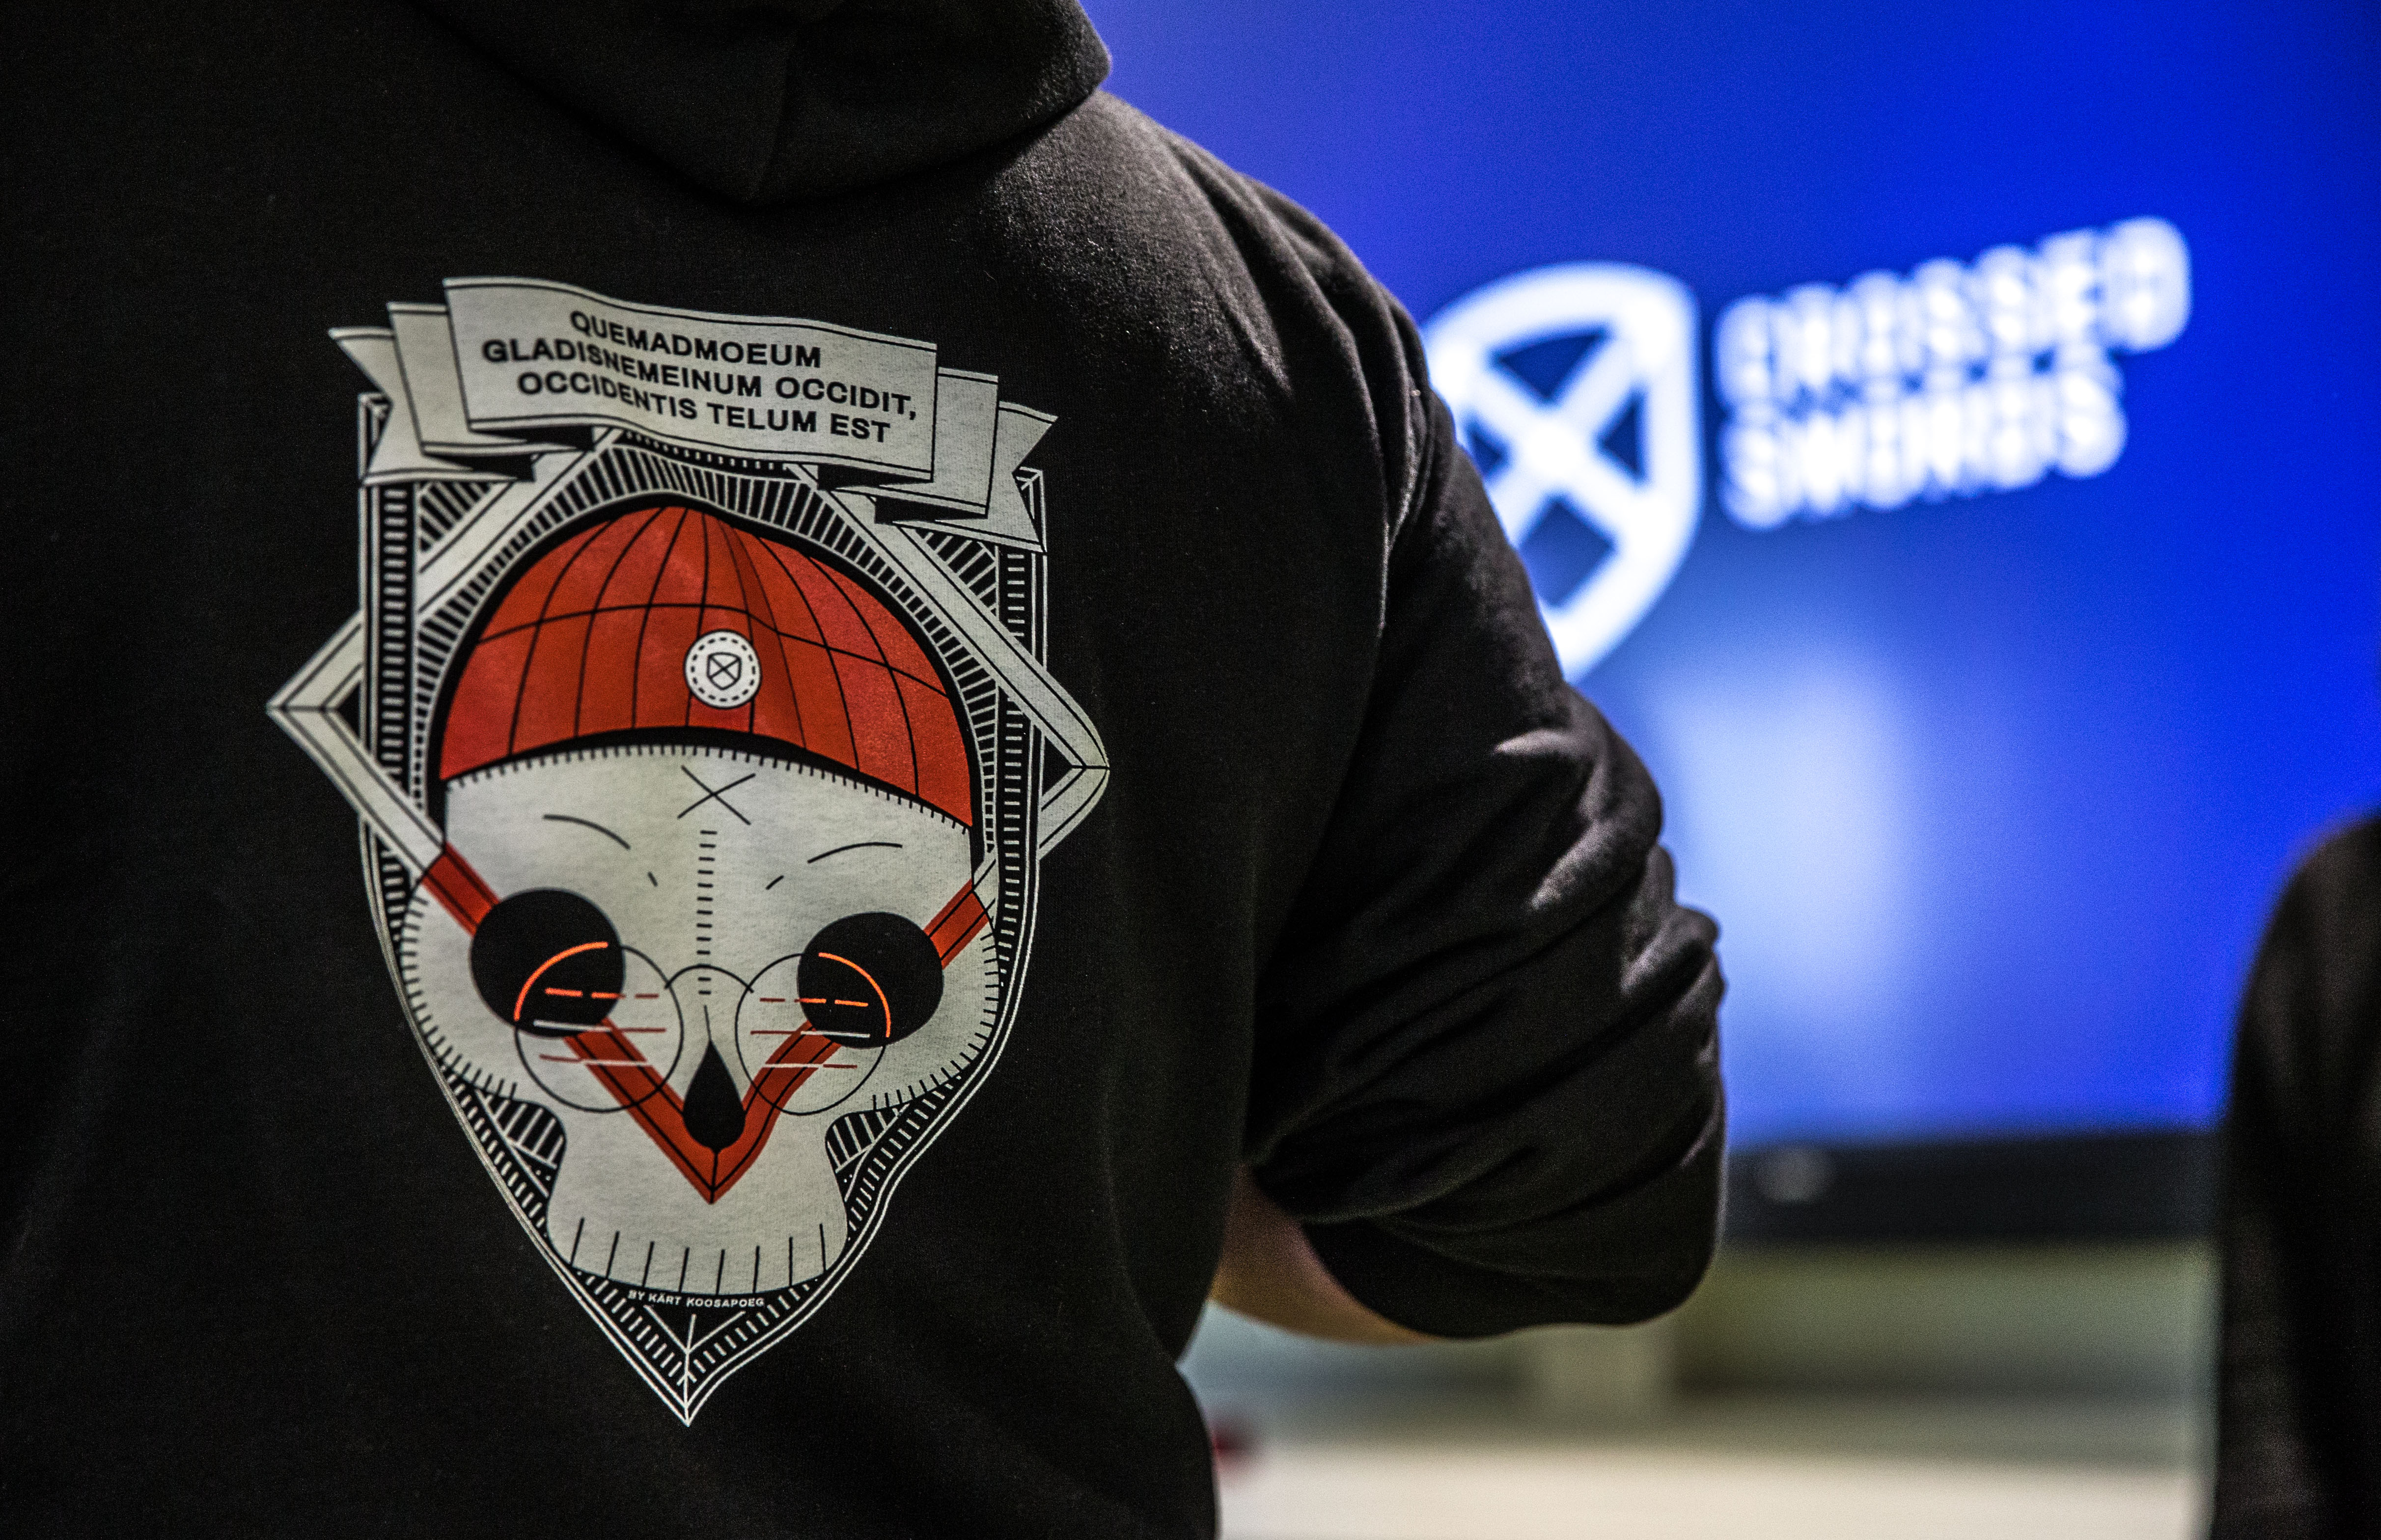 GREYCORTEX Supports Crossed Shields for Second Year